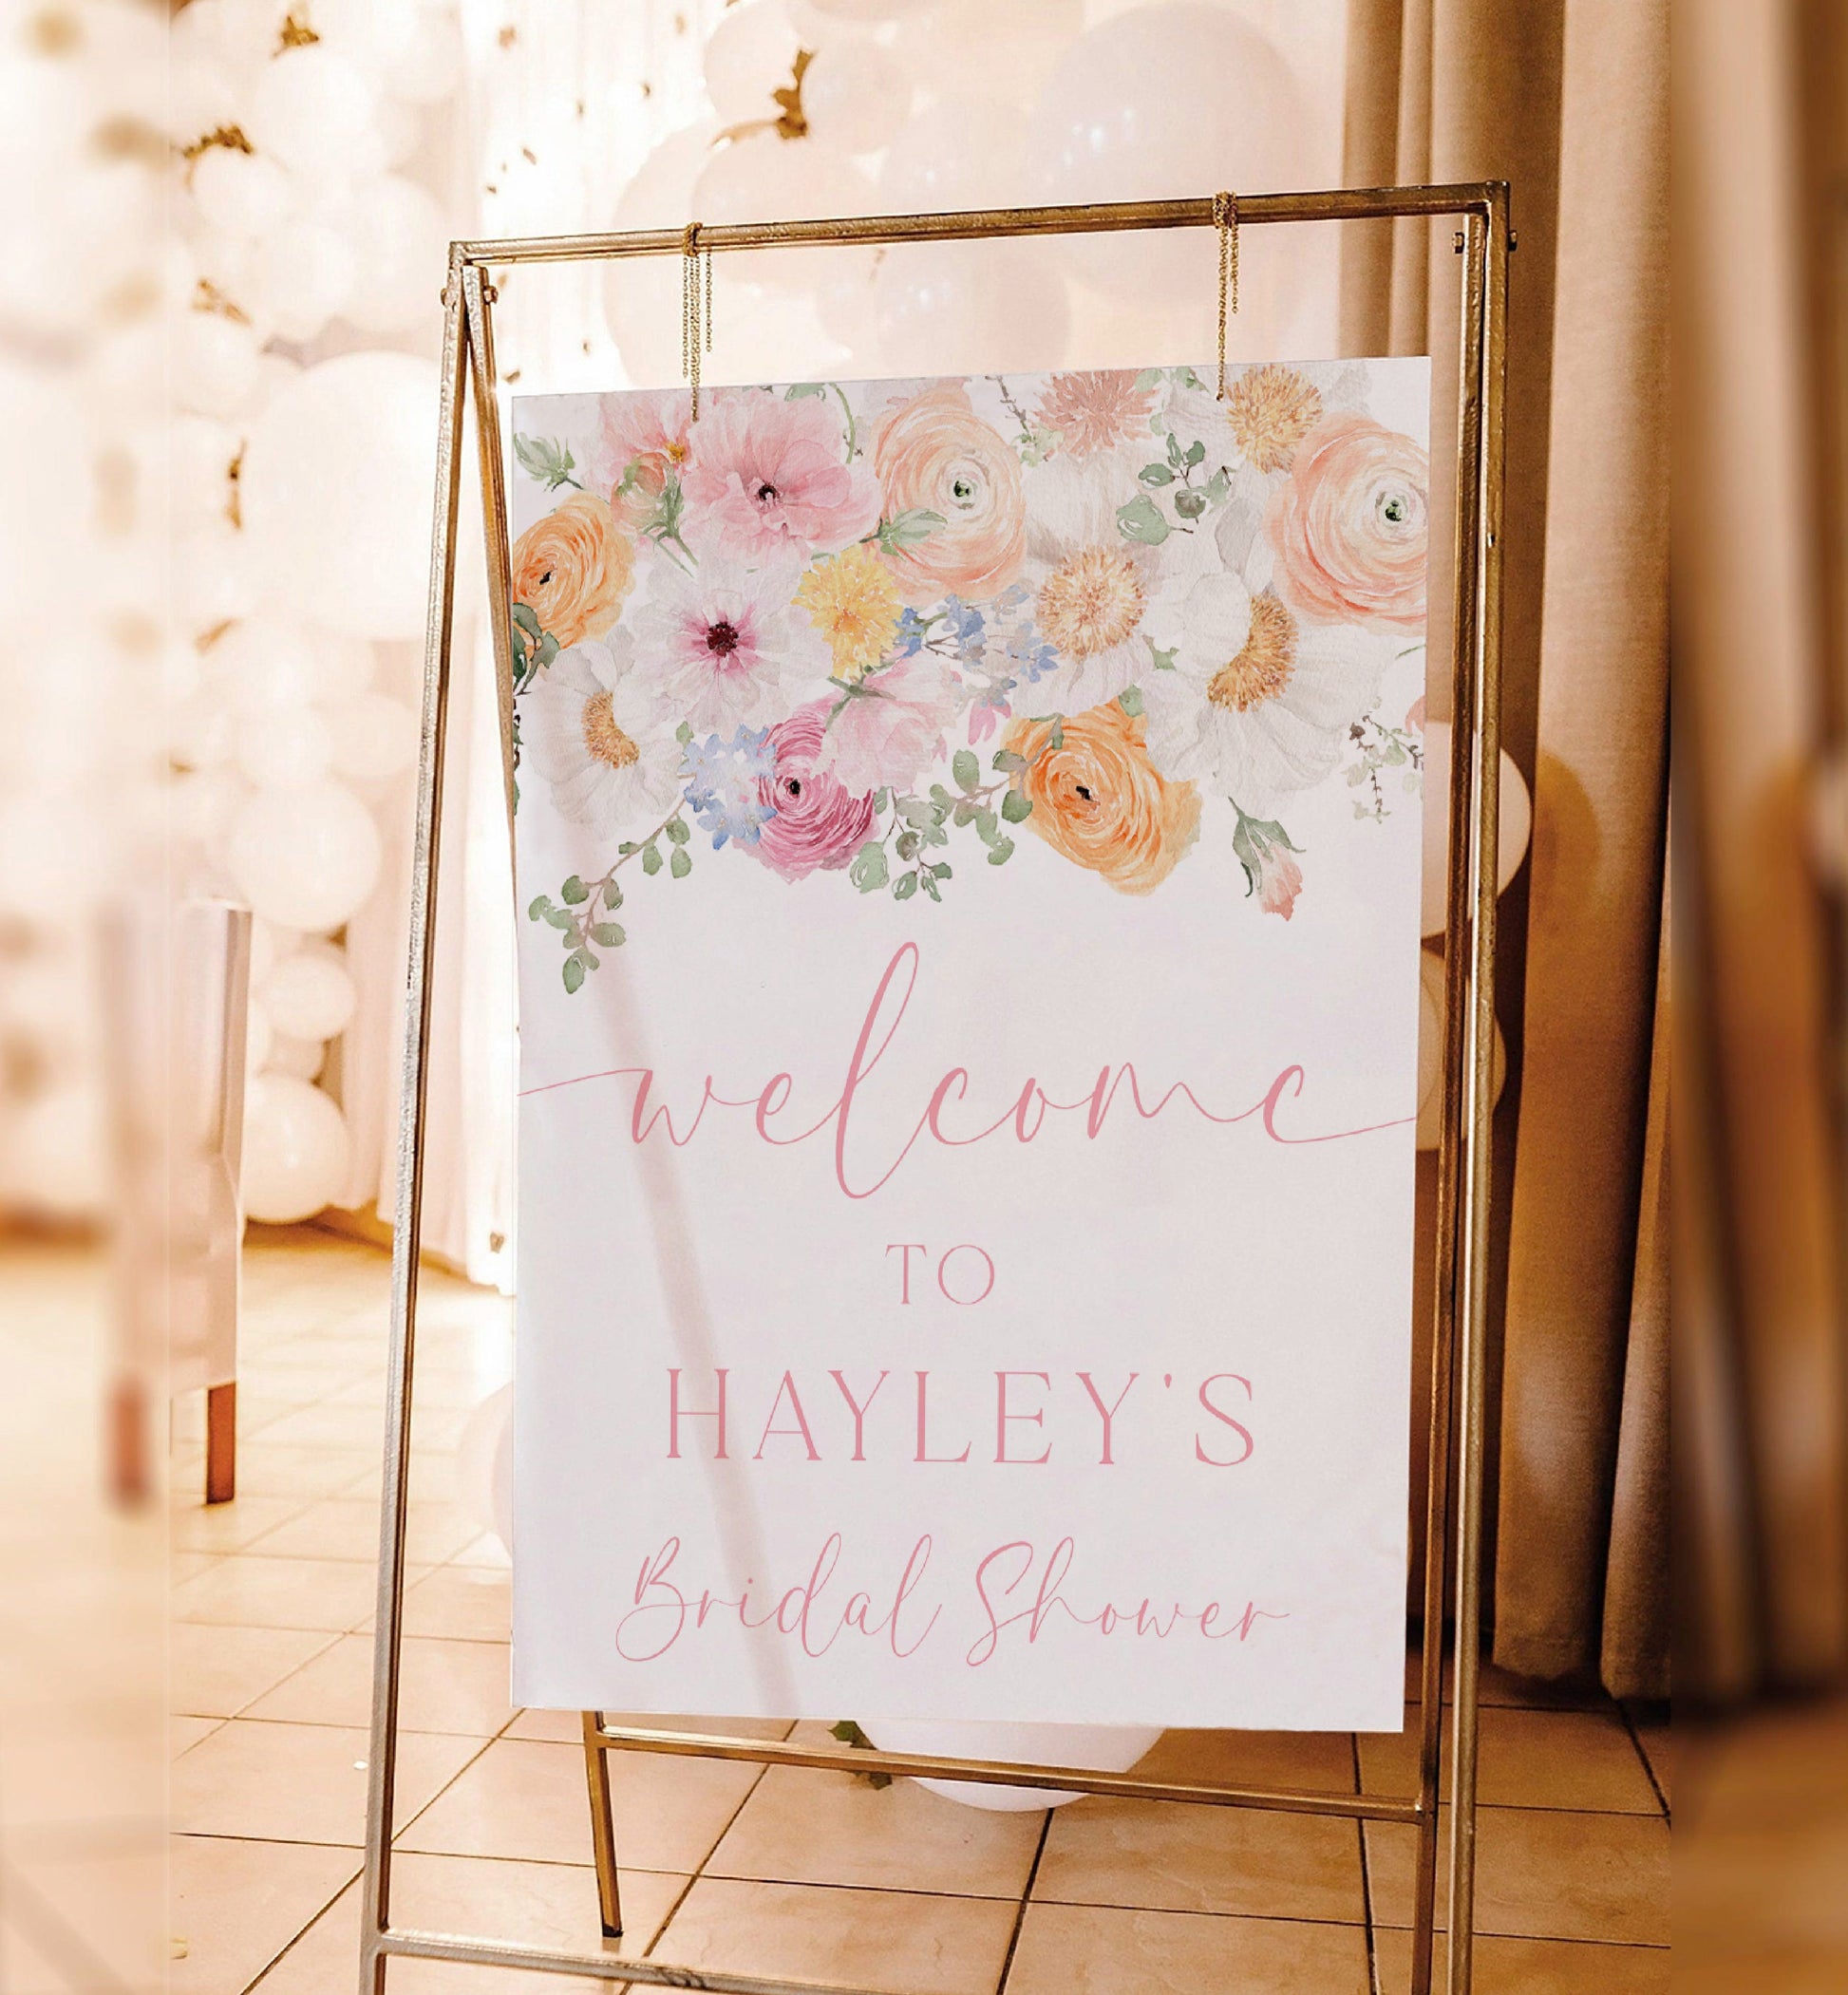 Printable Welcome Sign Template, Printable Spring Floral Baby Shower Welcome Sign, Wildflower Floral Girl Baby Shower Welcome Sign, Millie